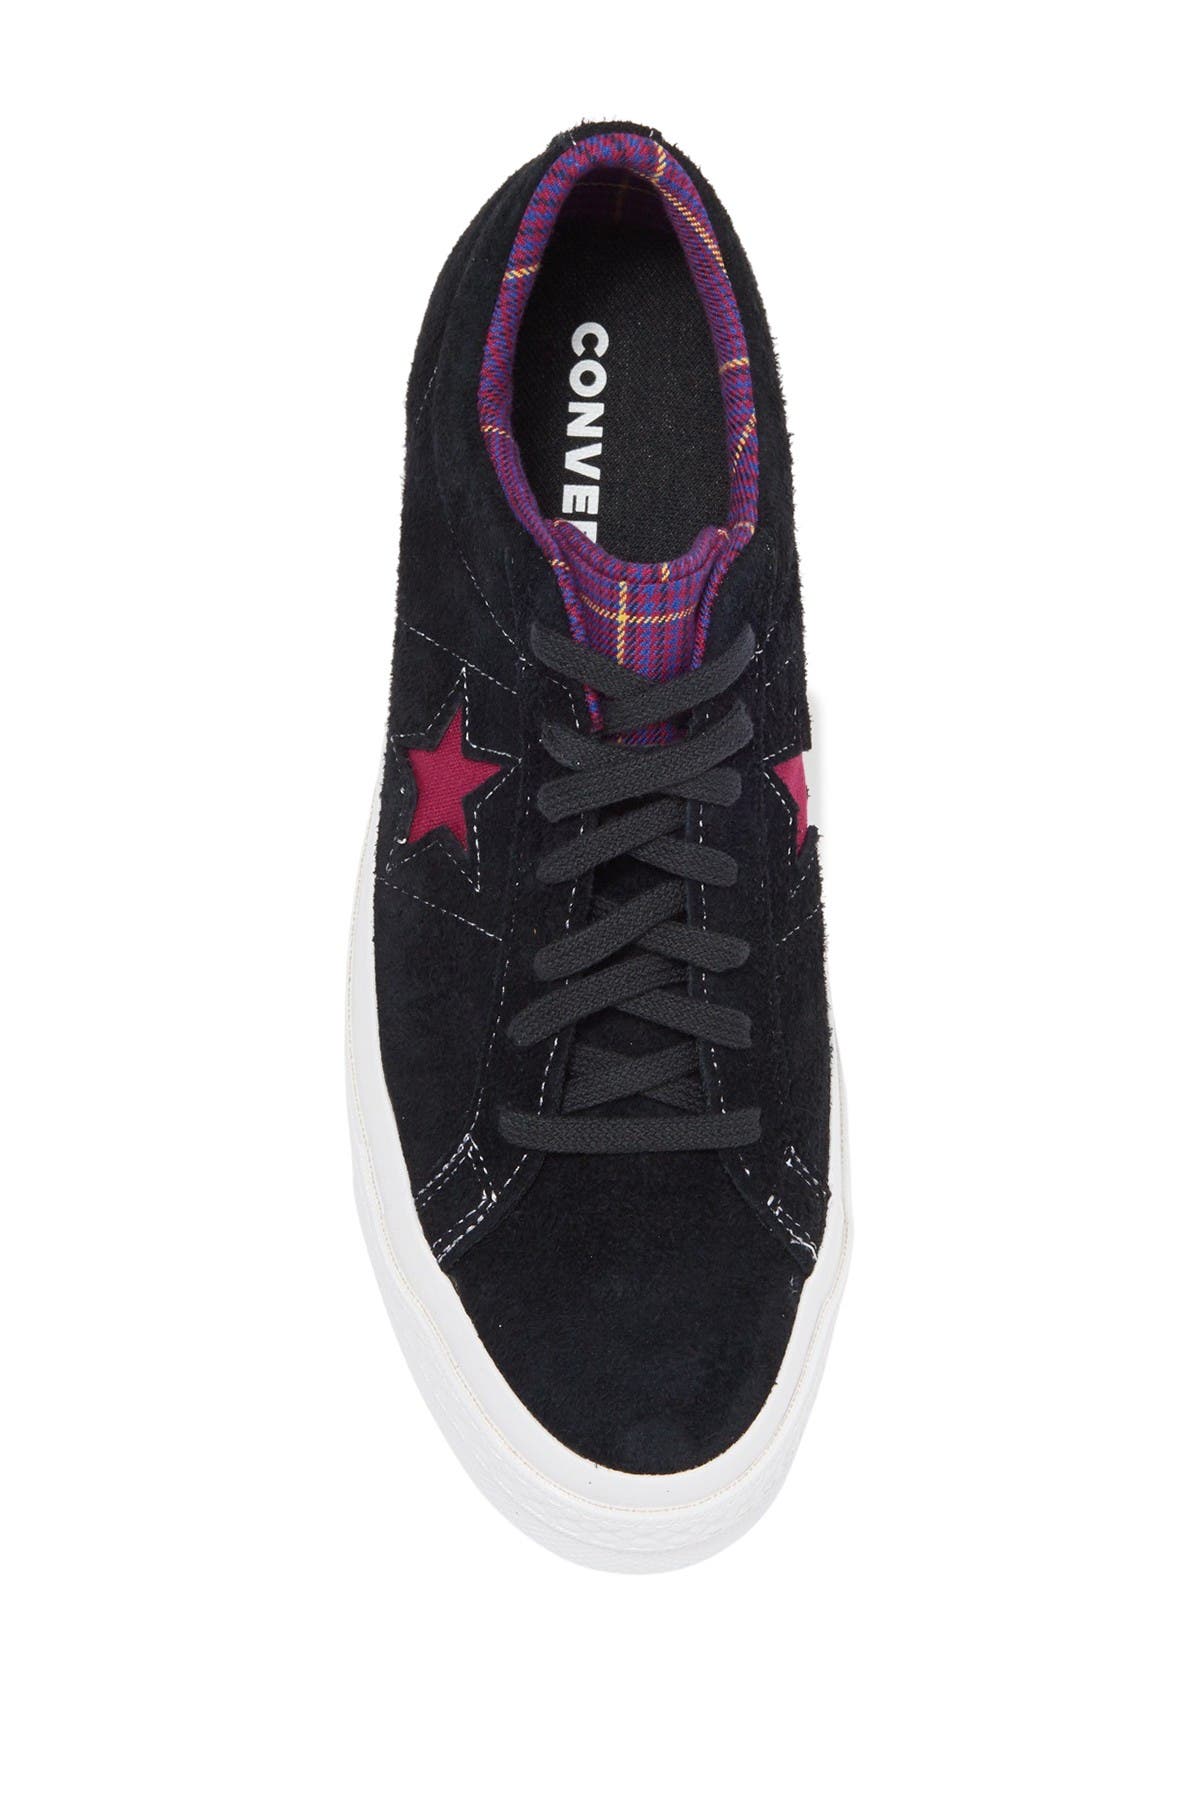 converse one star oxford sneakers